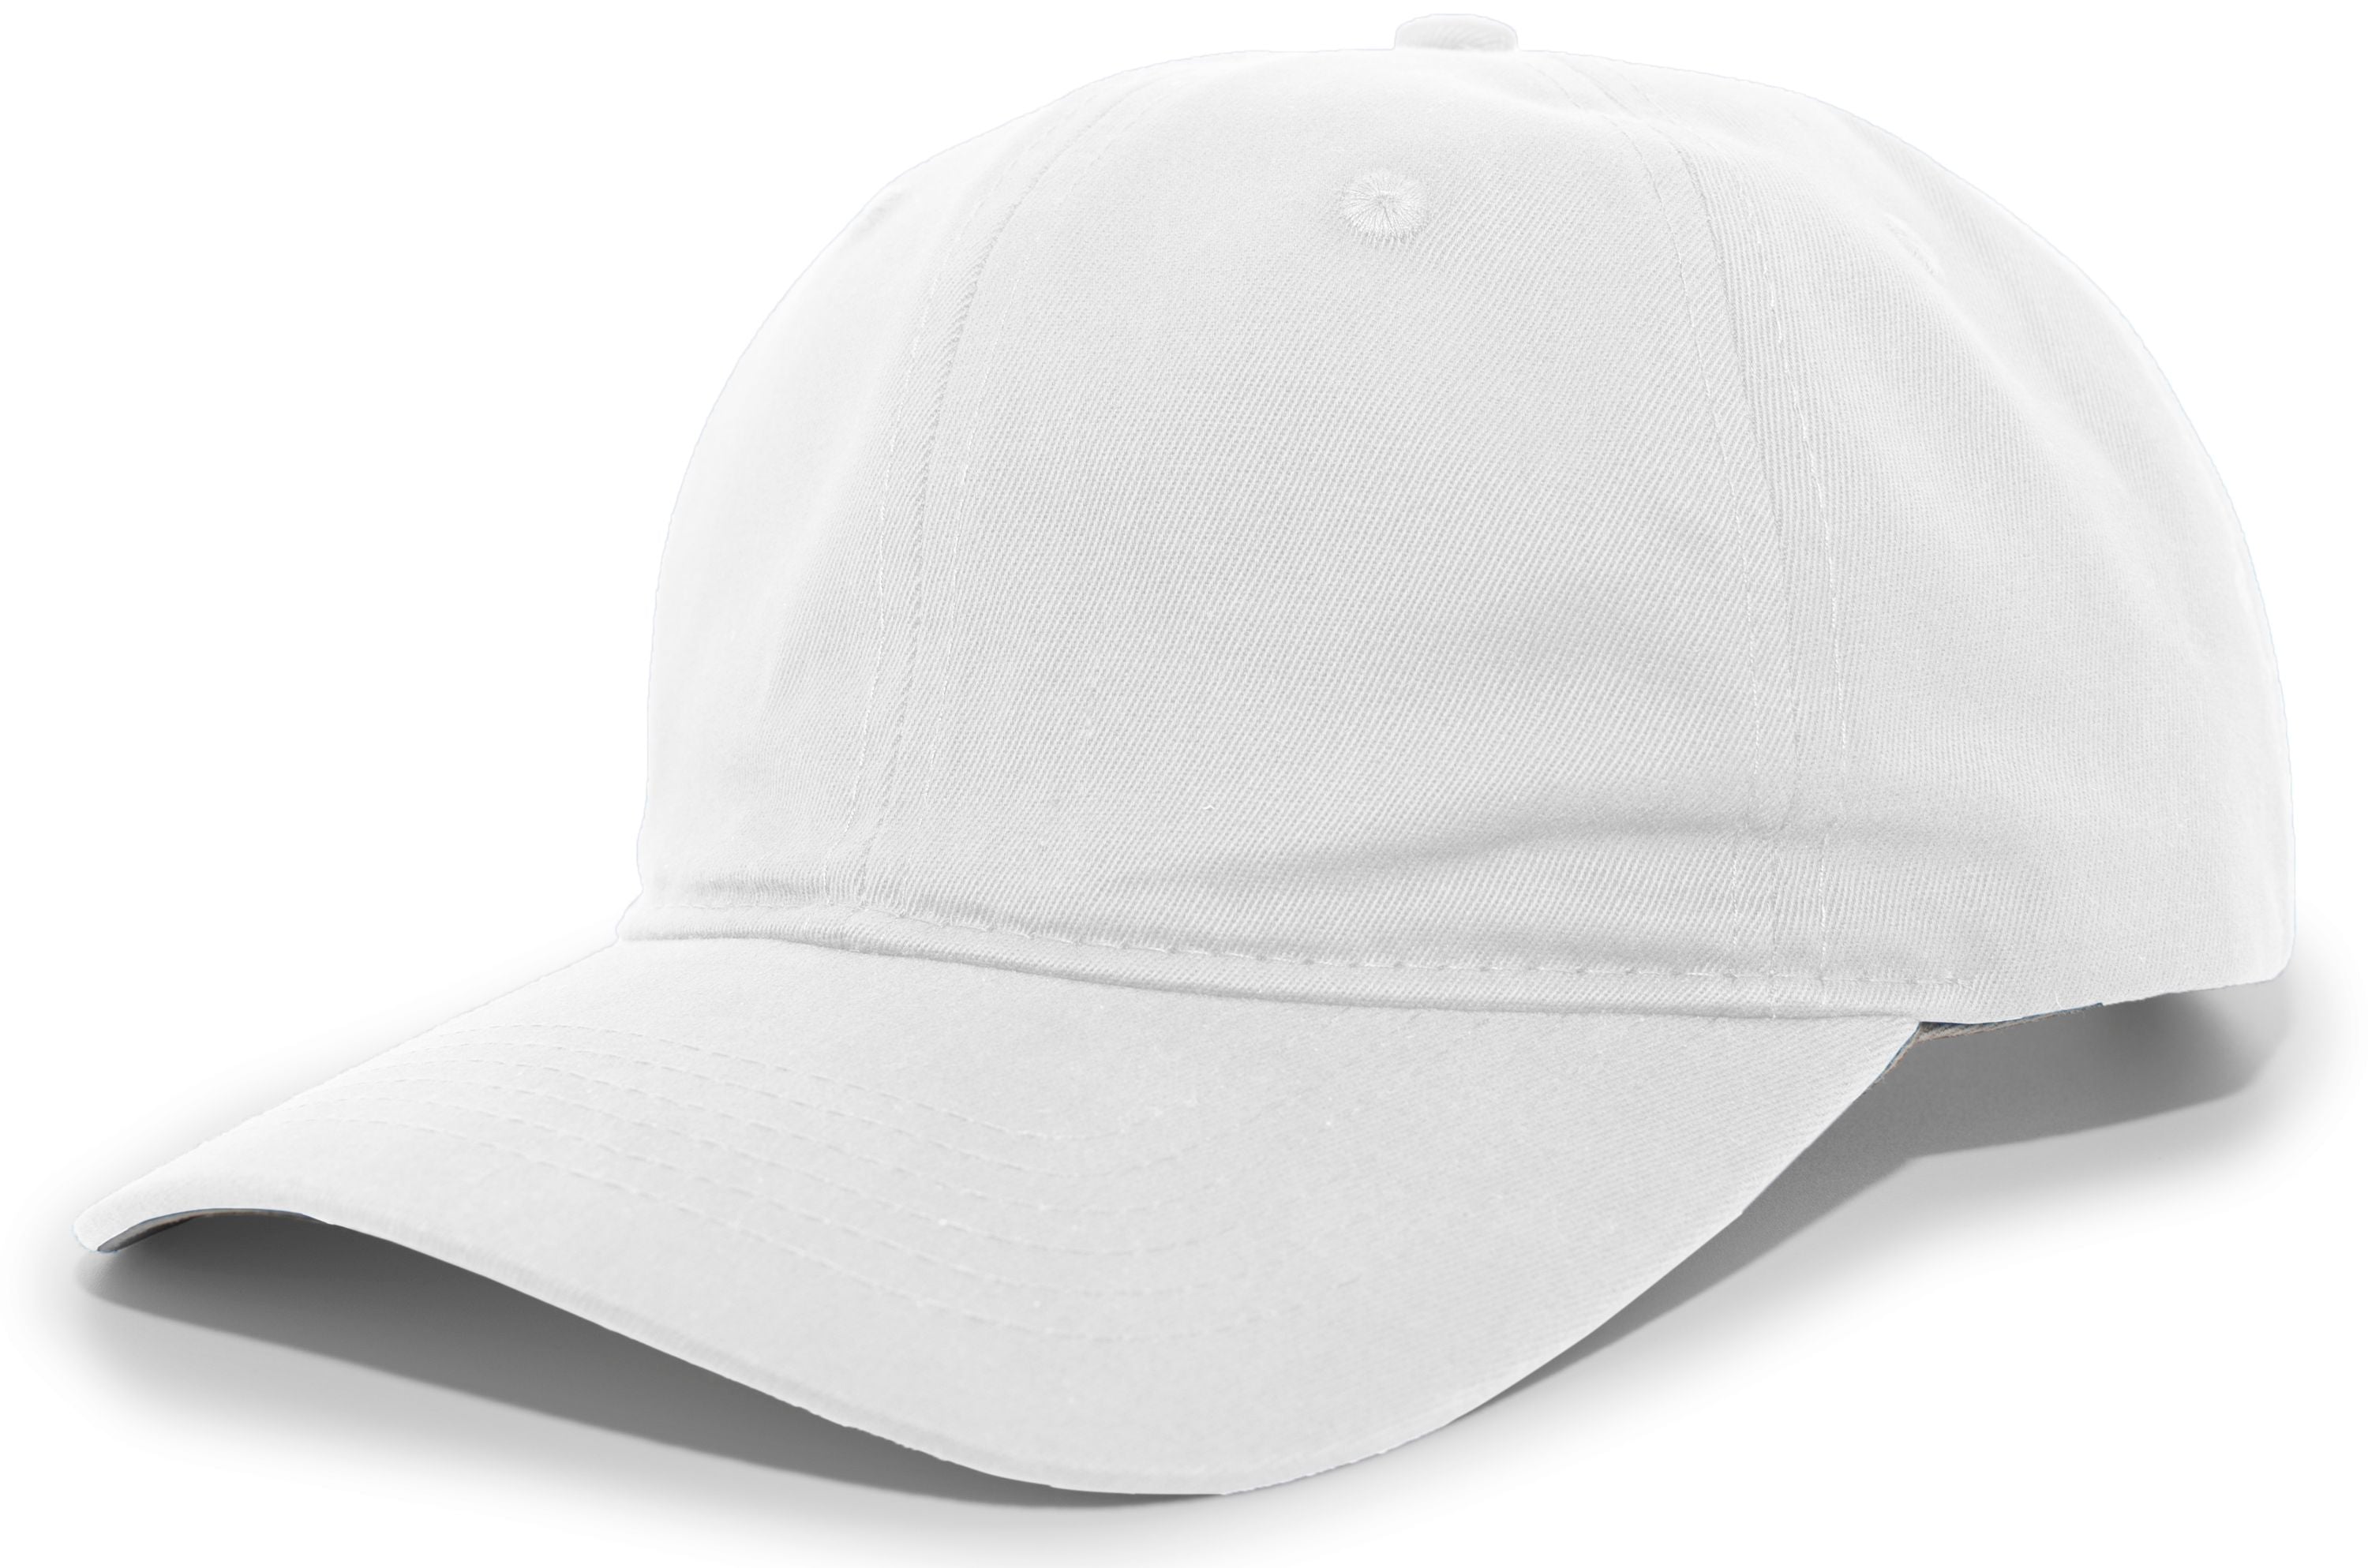 Pacific Headwear Brushed Cotton Twill Hook-and-loop Adjustable Cap